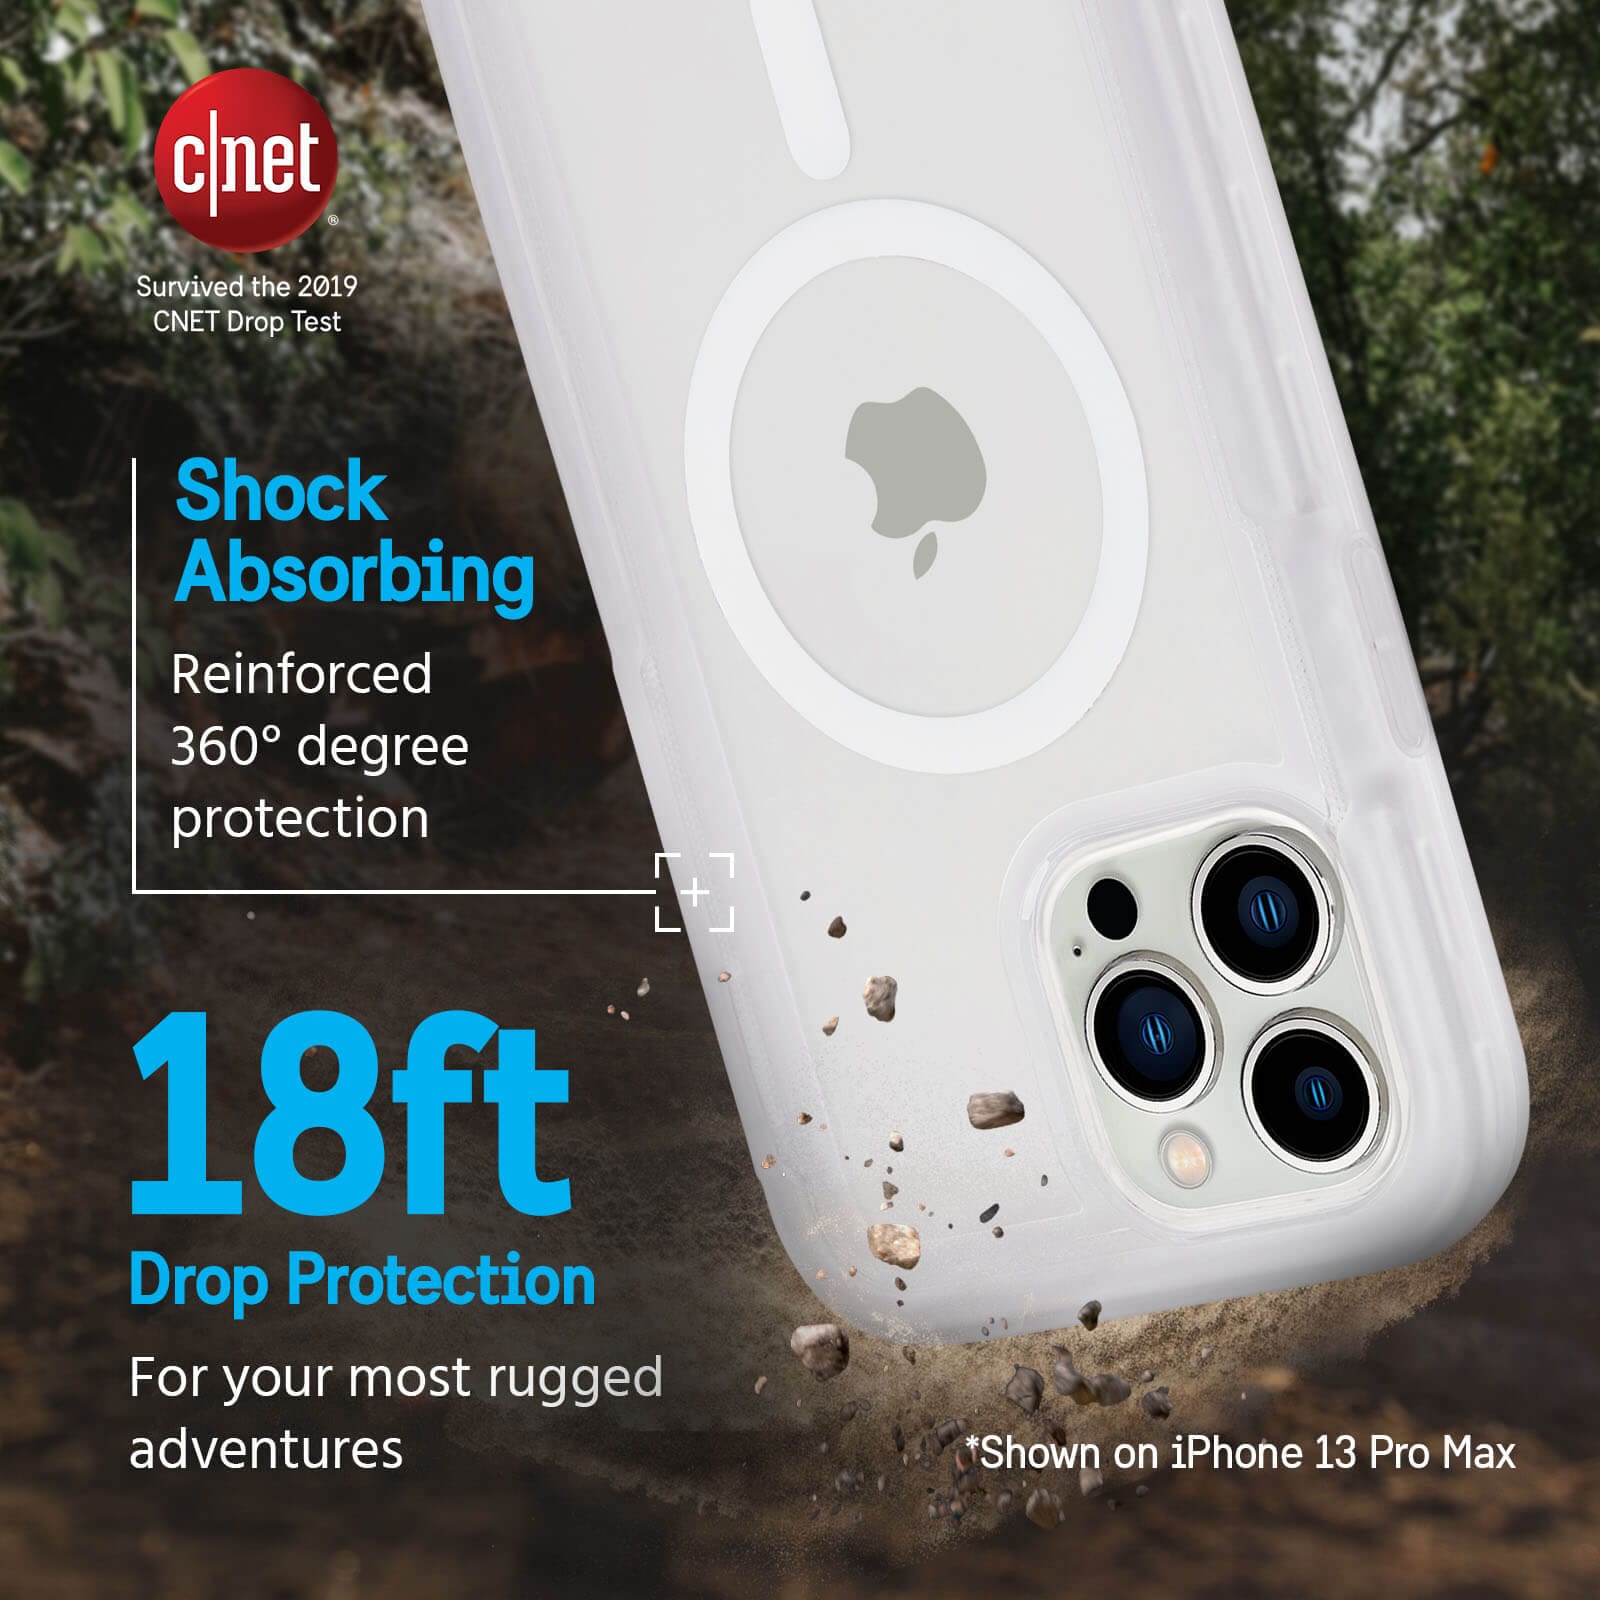 Survived the 2019 CNET Drop Test. Shock Absorbing Reinforced 360 degree protection. 18ft drop protection for your most rugged adventures. color::Clear